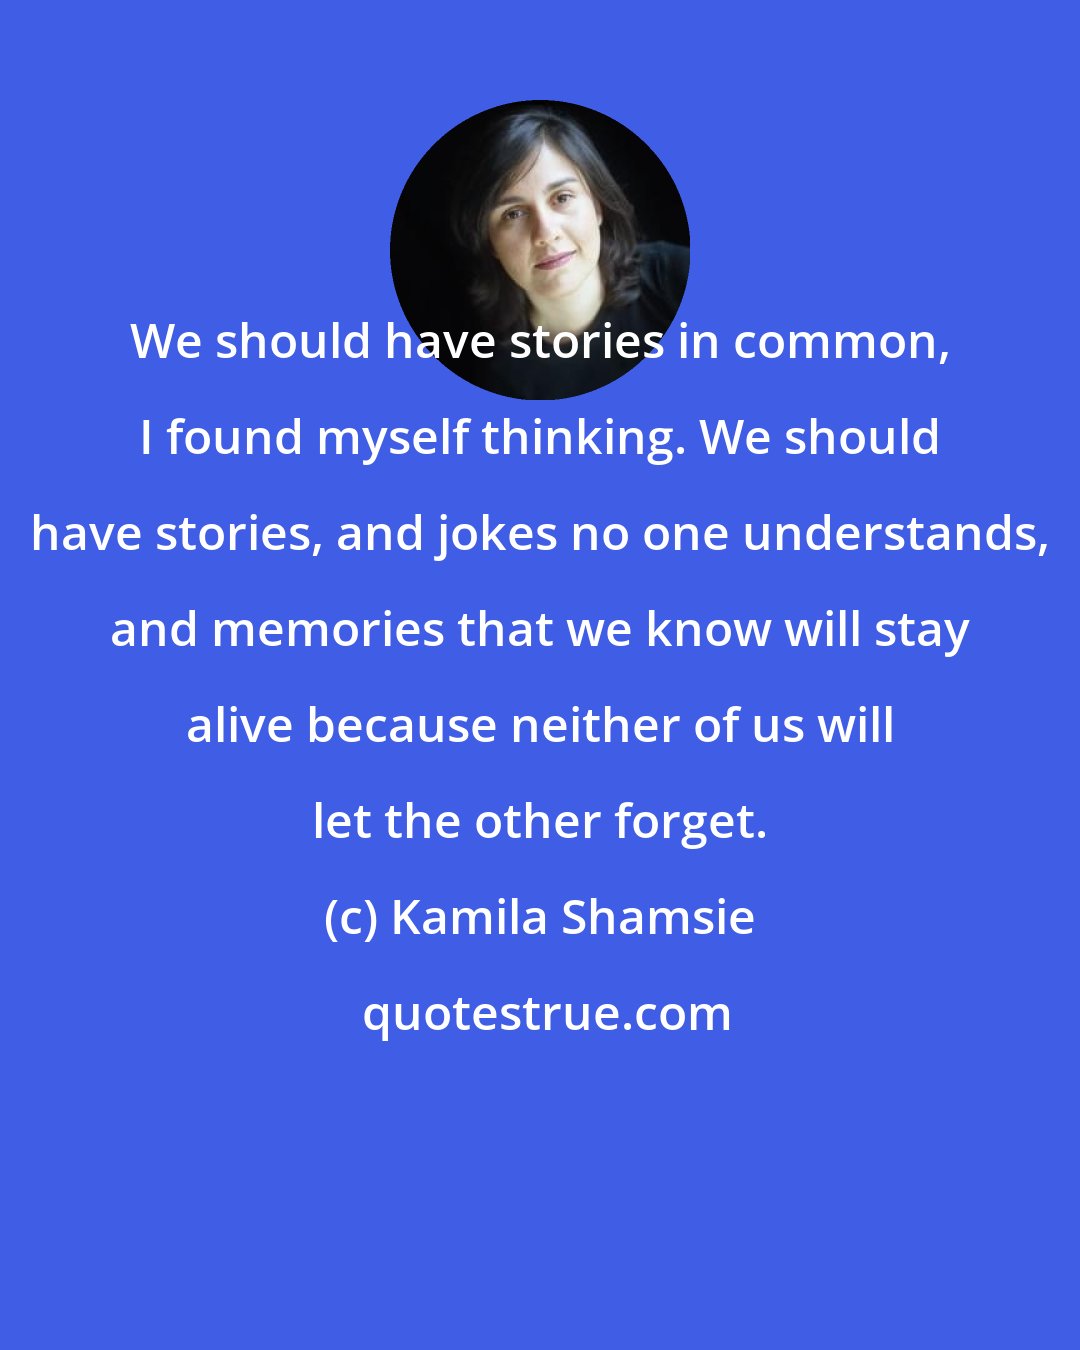 Kamila Shamsie: We should have stories in common, I found myself thinking. We should have stories, and jokes no one understands, and memories that we know will stay alive because neither of us will let the other forget.